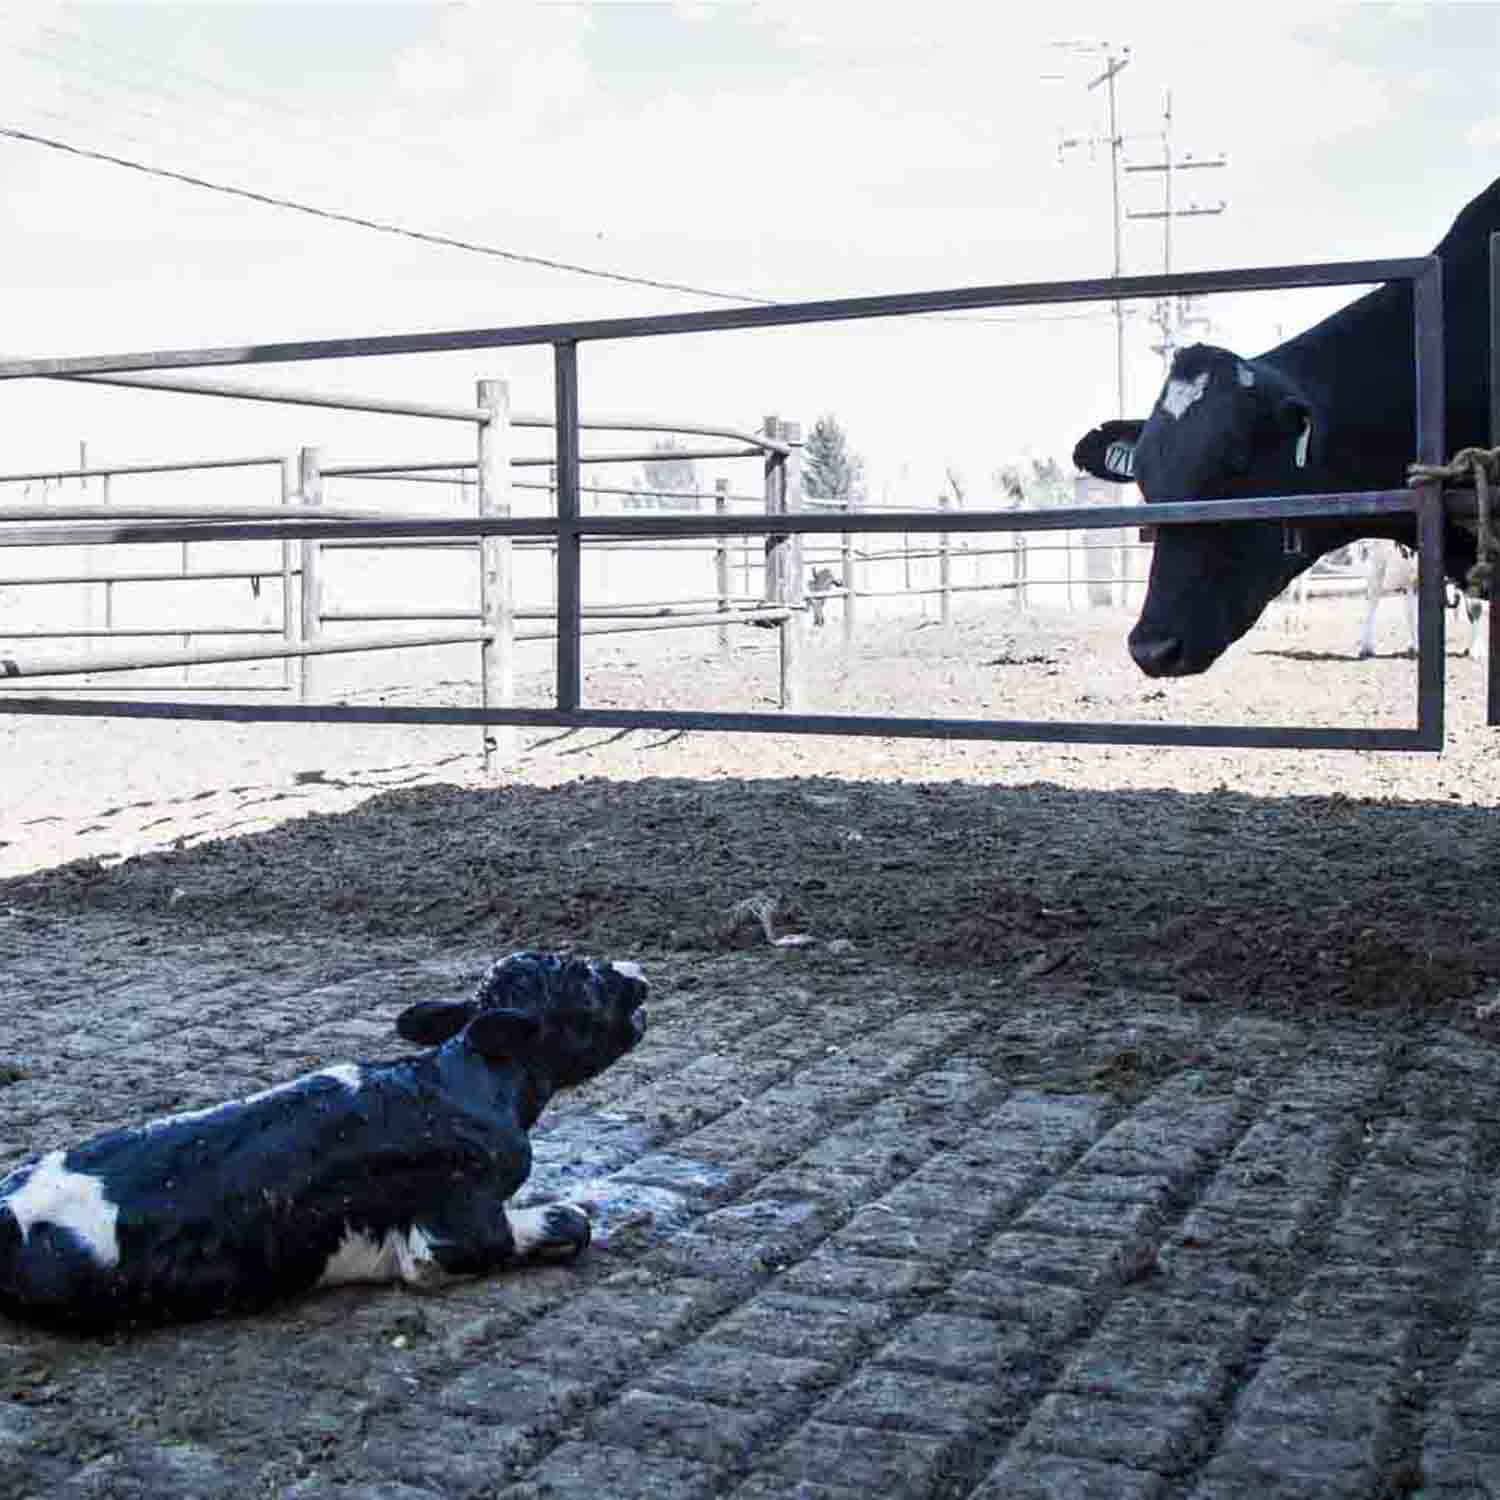 calf crying out for her mother who is separated from her by a fence